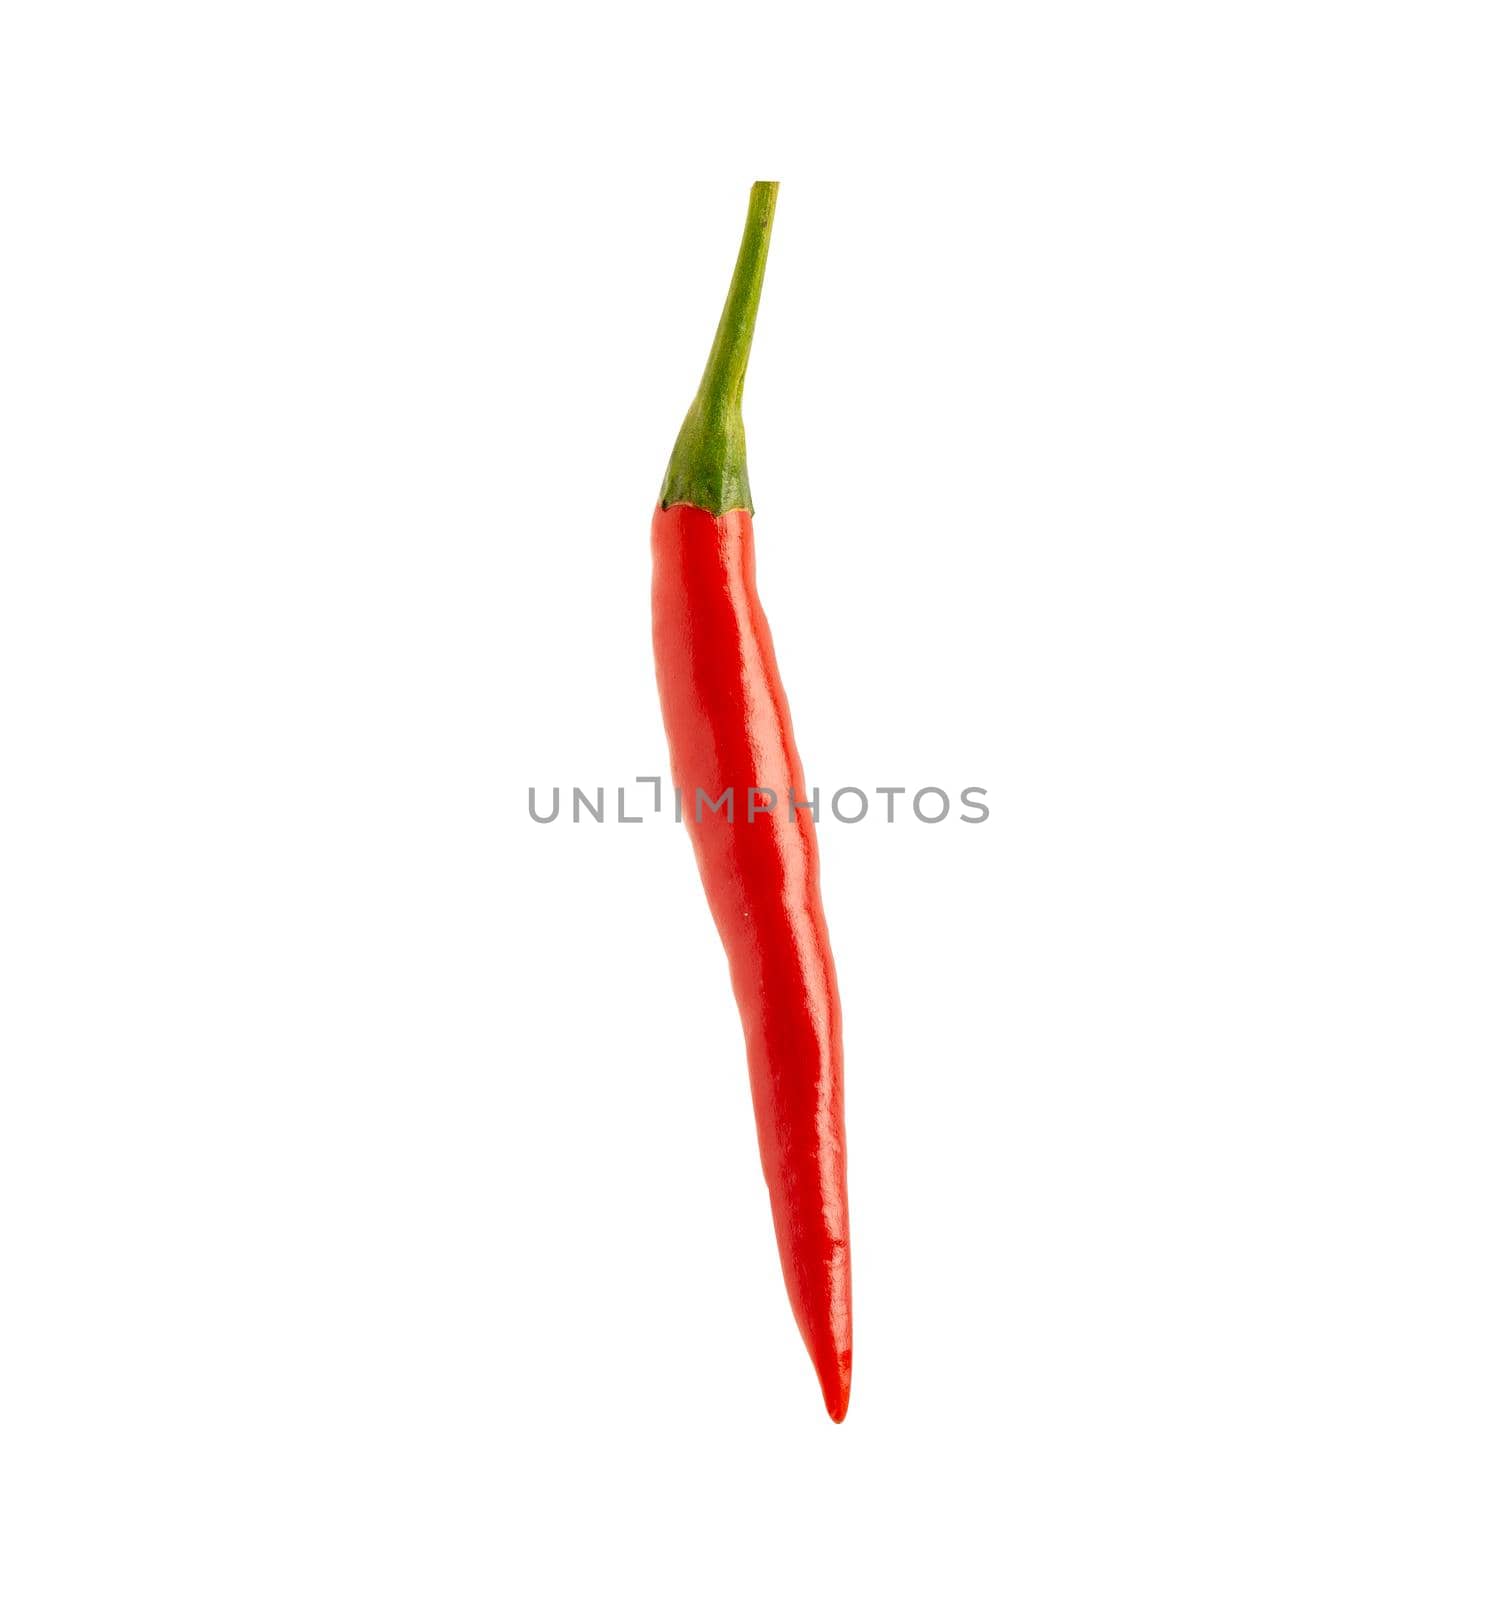 Pepper or chili red and hot vegetable isolated on white background with clipping path. by pamai